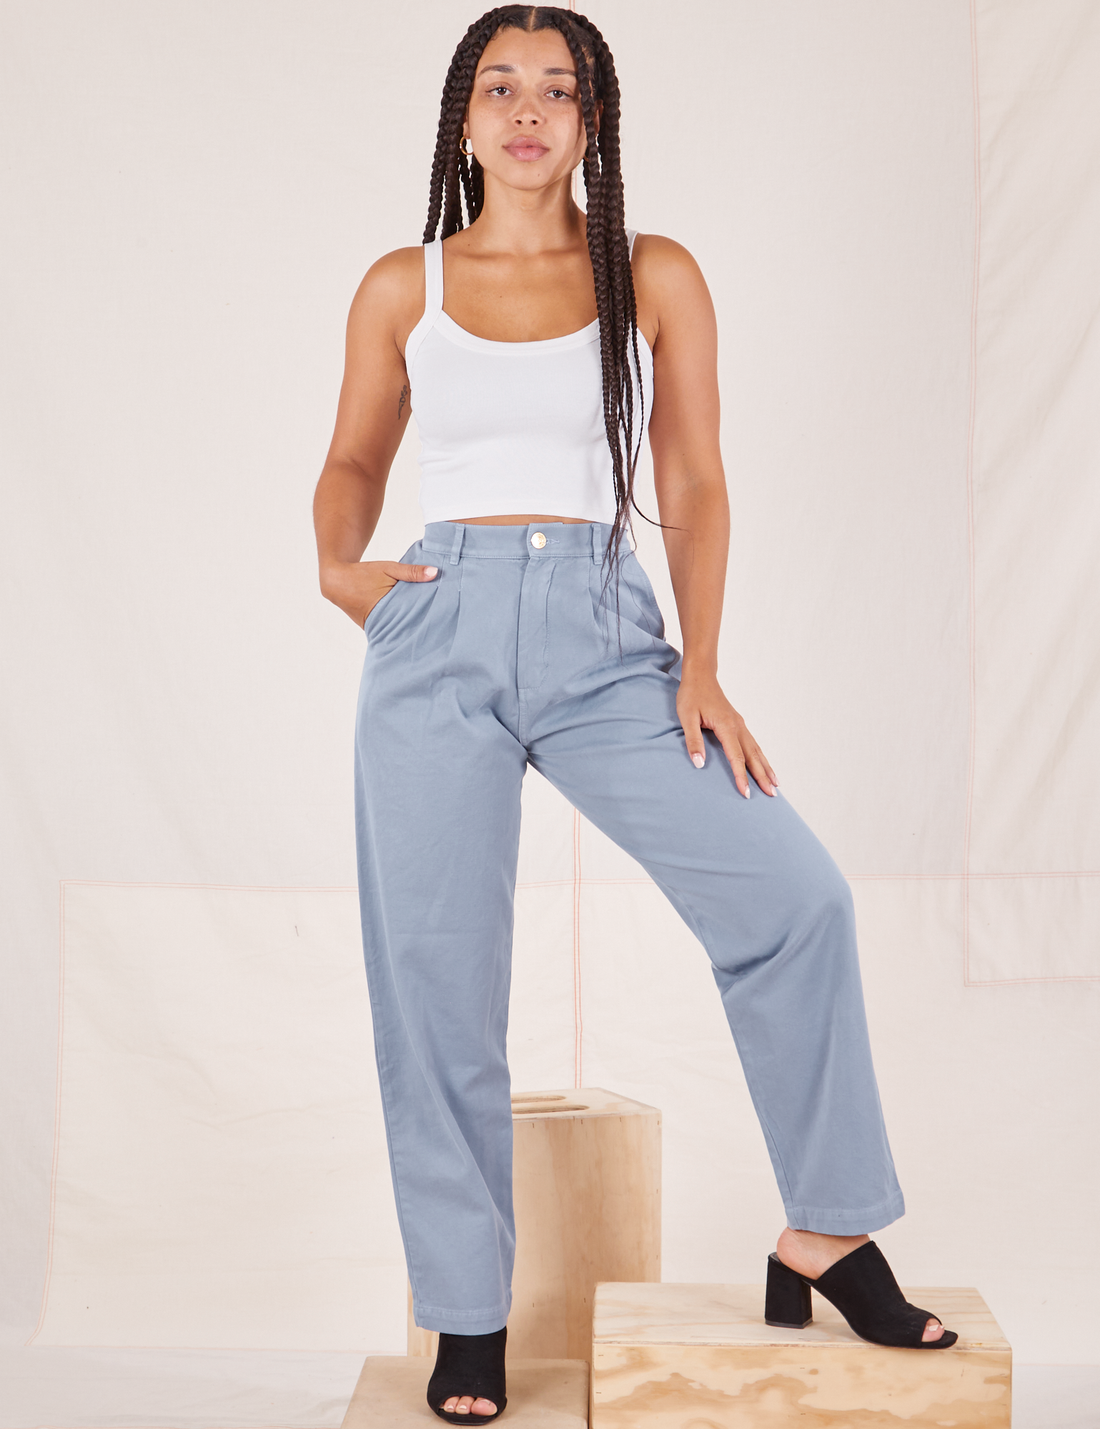 Gabi is 5'7" and wearing XXS Organic Trousers in Periwinkle paired with vintage off-white Cropped Cami